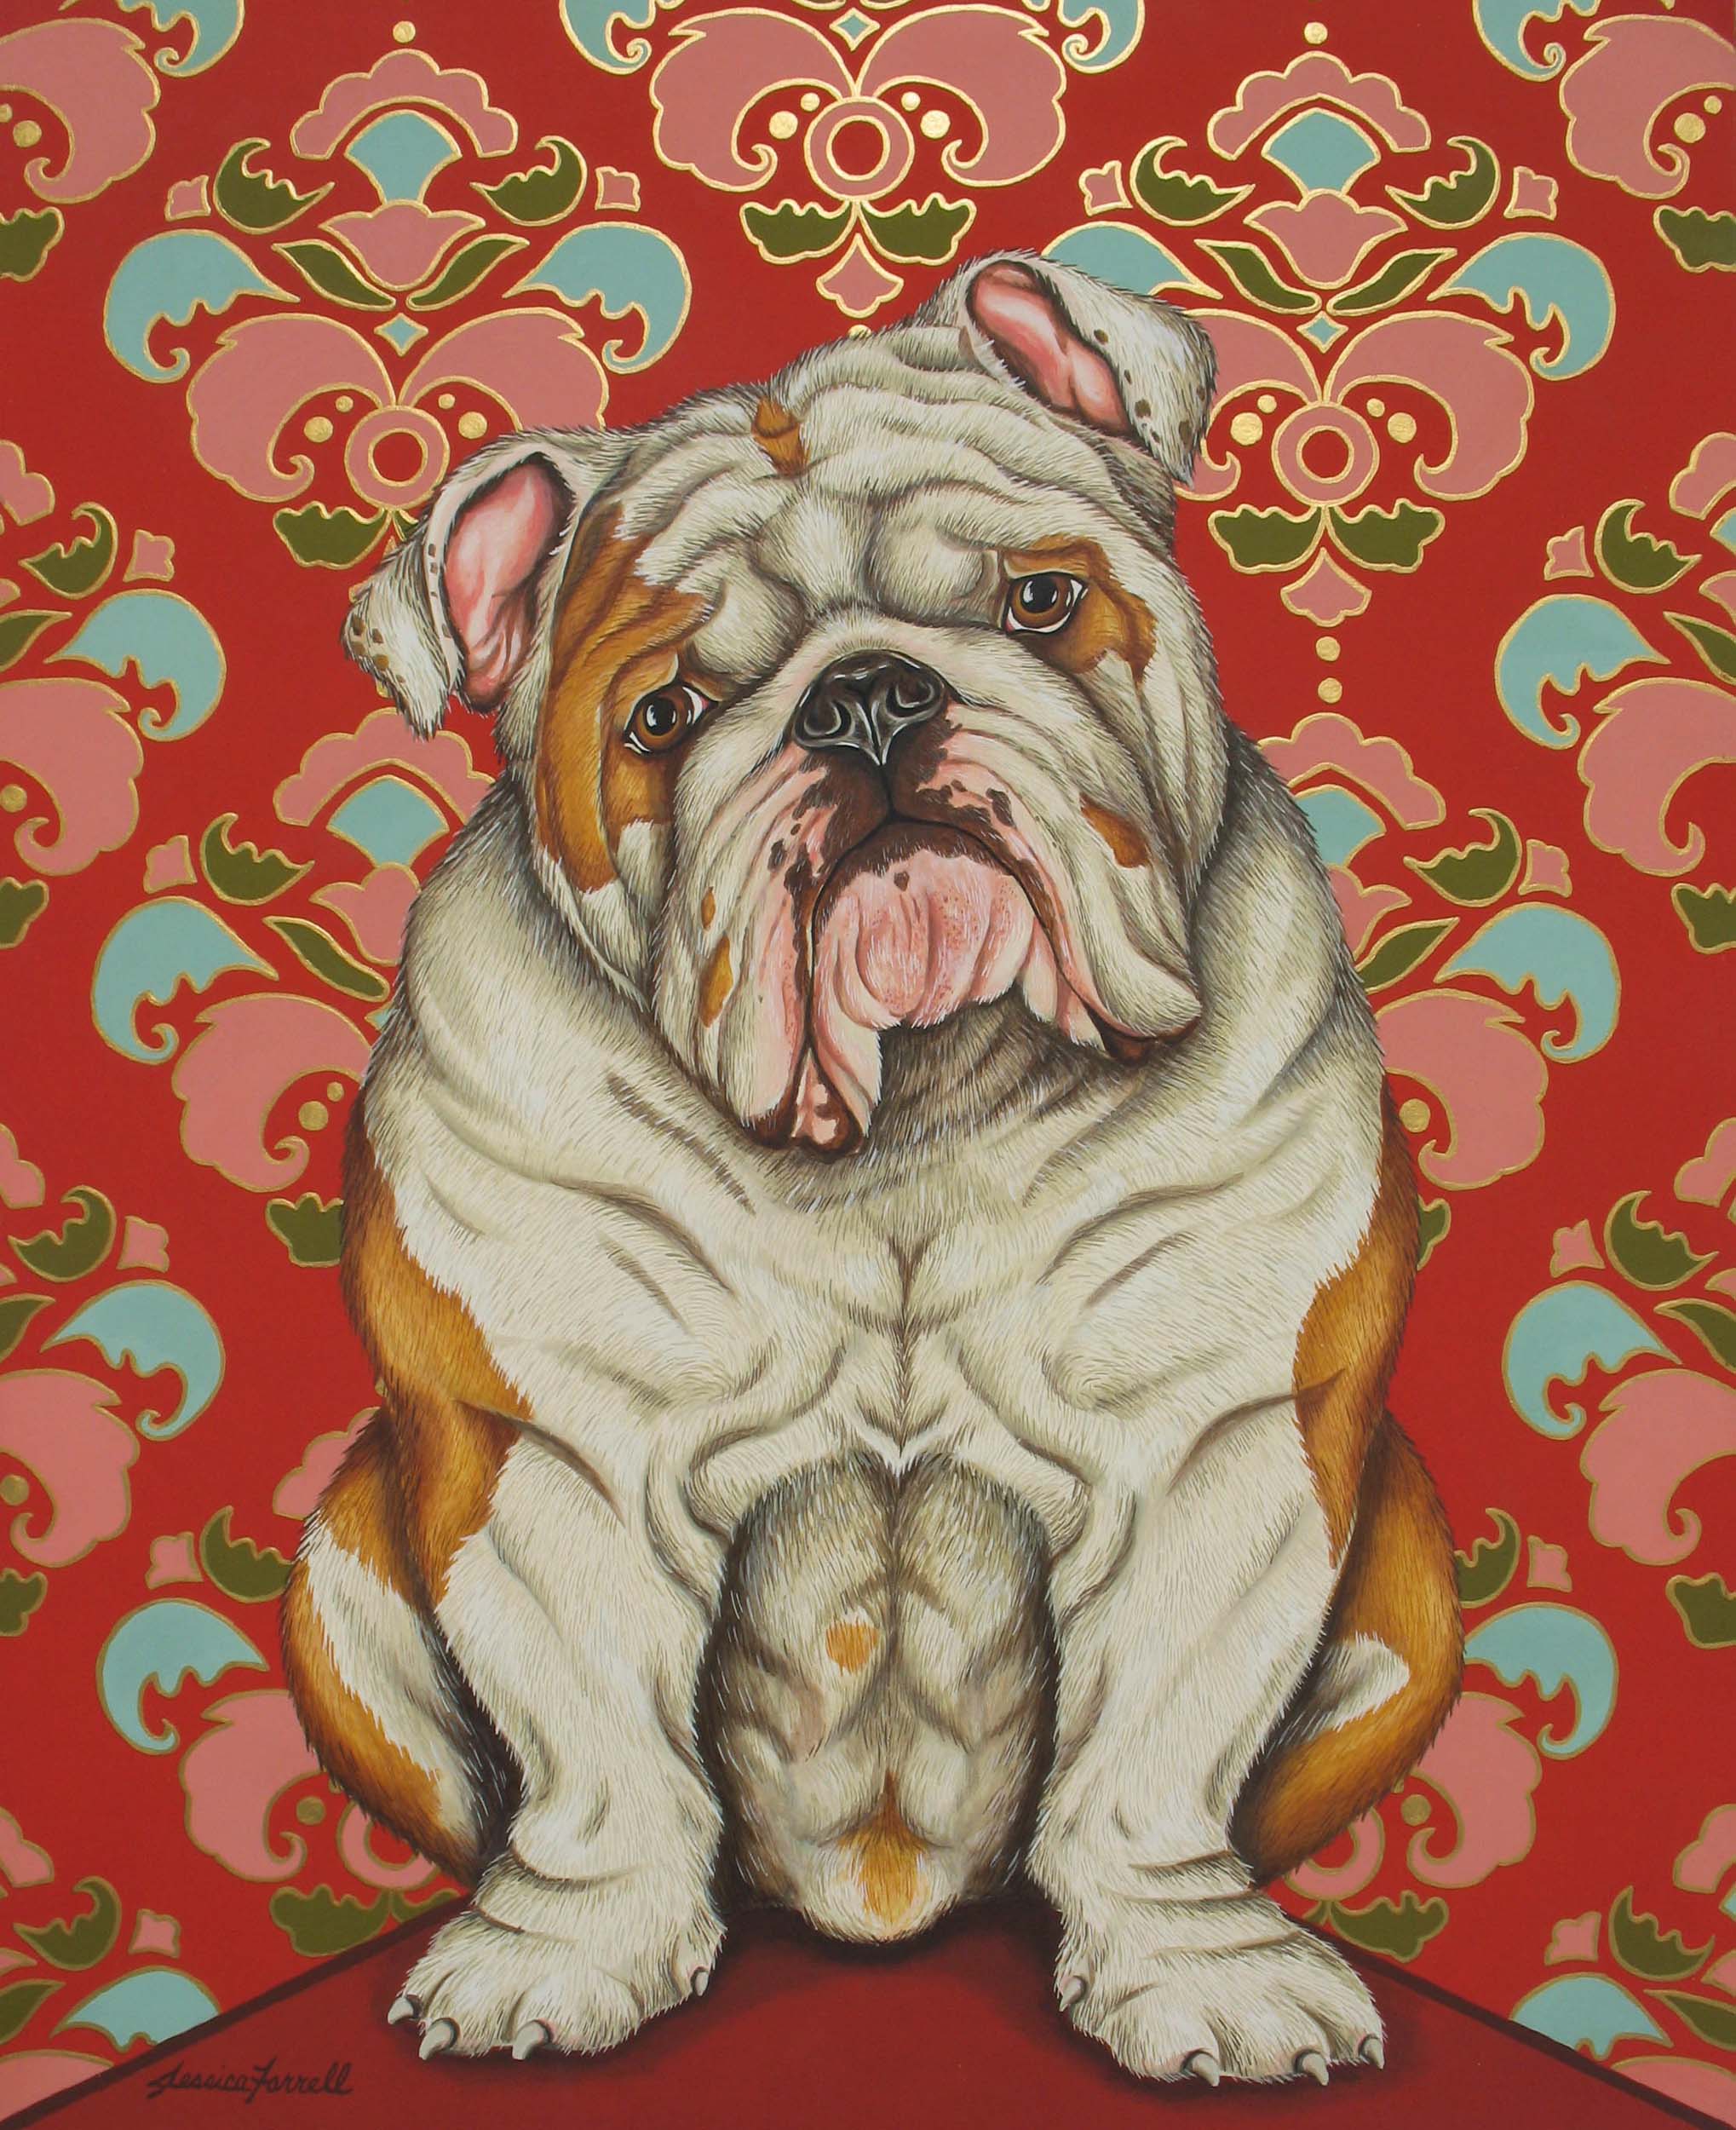   Bulldog , Acrylic on wood, 24 x 22 inches  (private collection) 